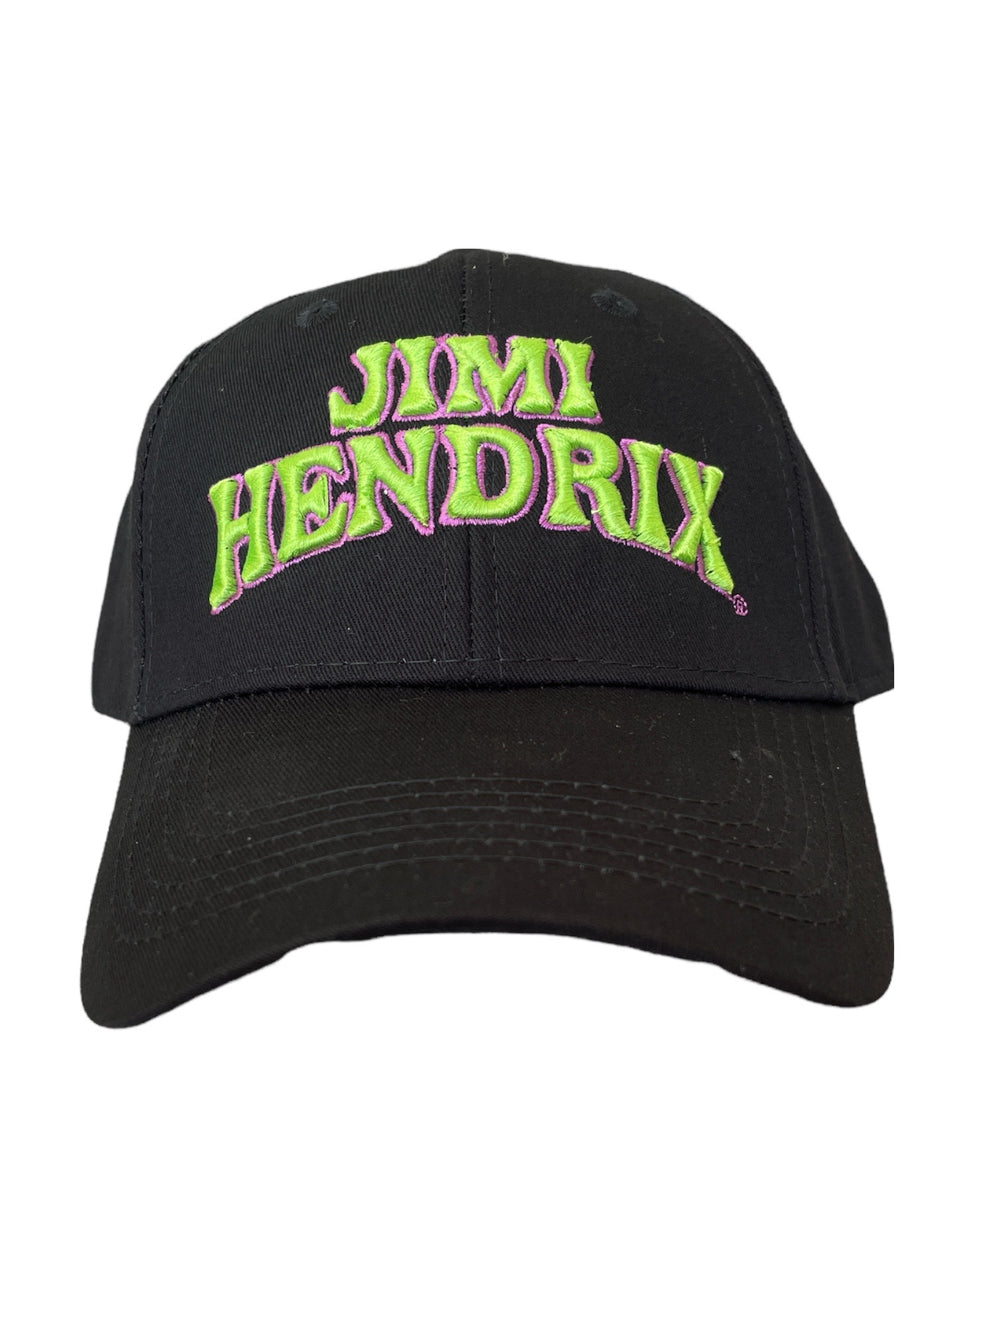 Jimi Hendrix Arched Logo Official Embroidered Peak Cap Adjustable